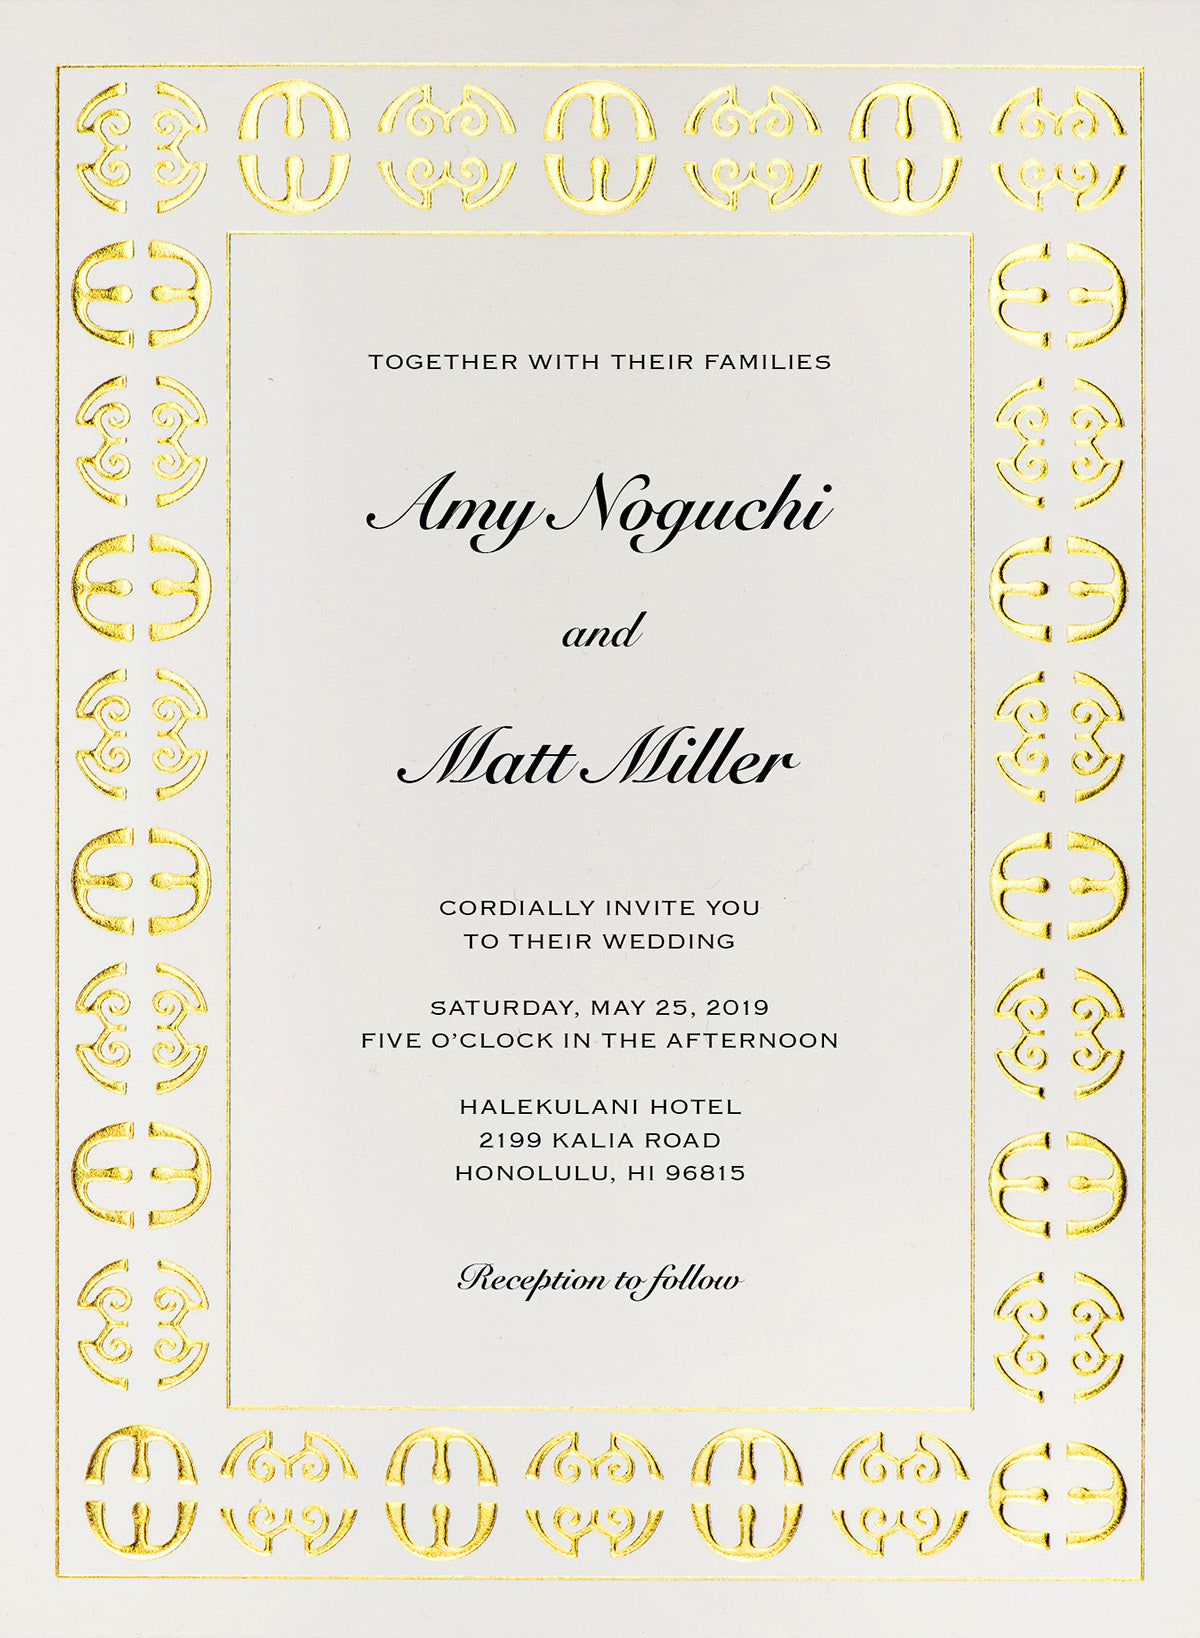 Invitation showing font options Snell Roundhand Bold and Copperplate Light